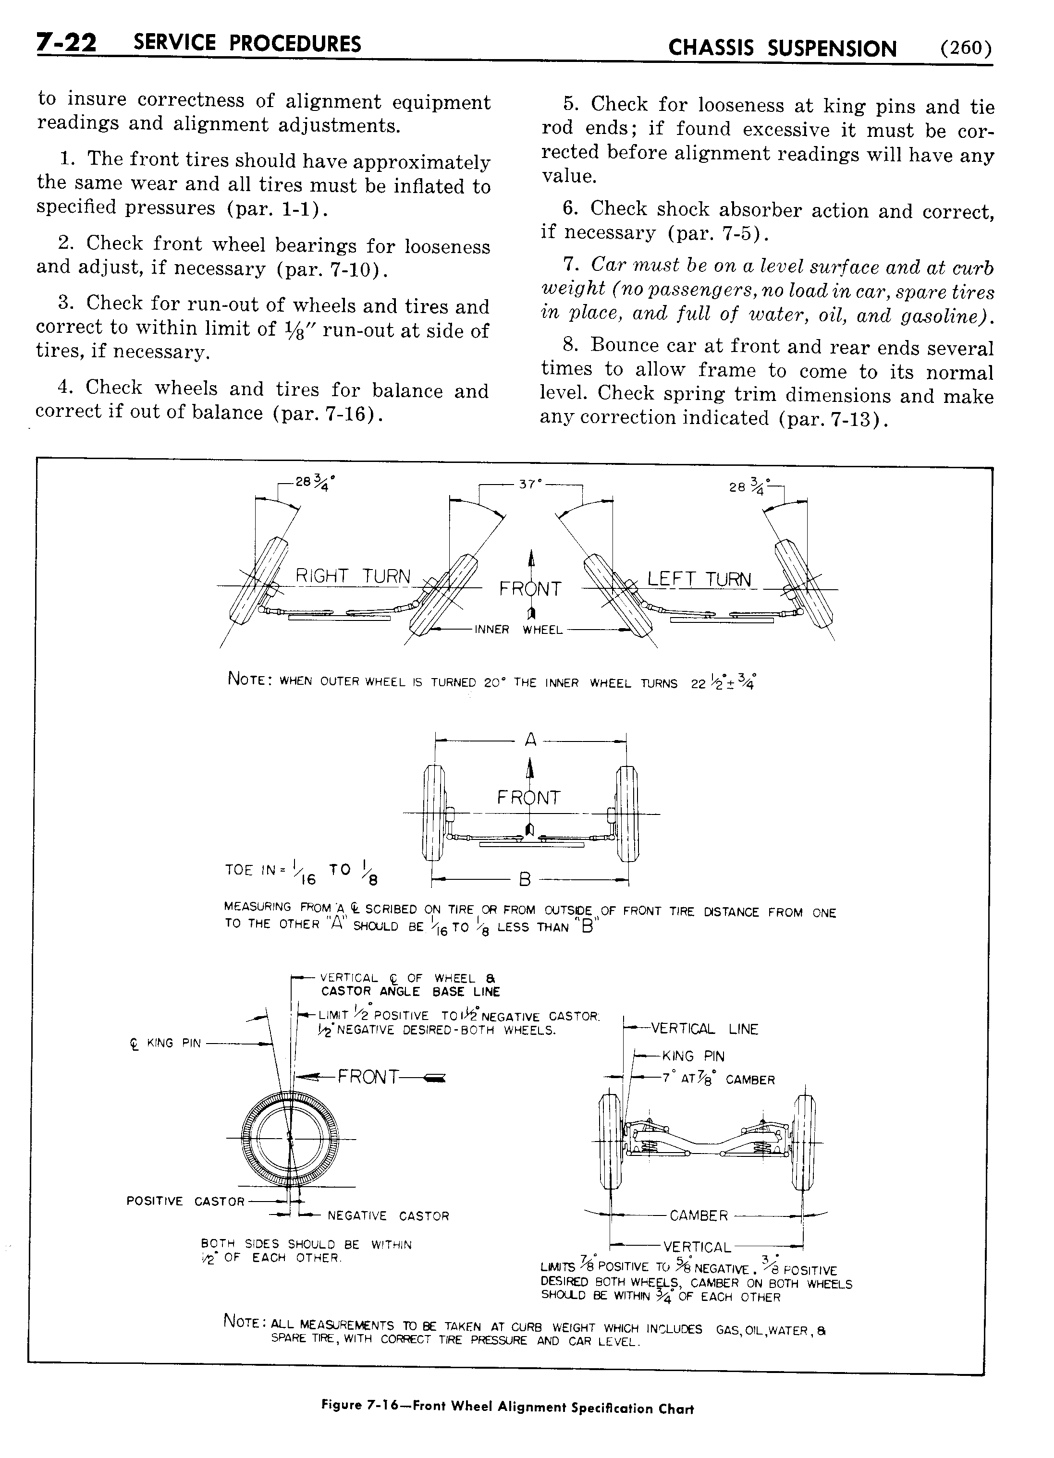 n_08 1956 Buick Shop Manual - Chassis Suspension-022-022.jpg